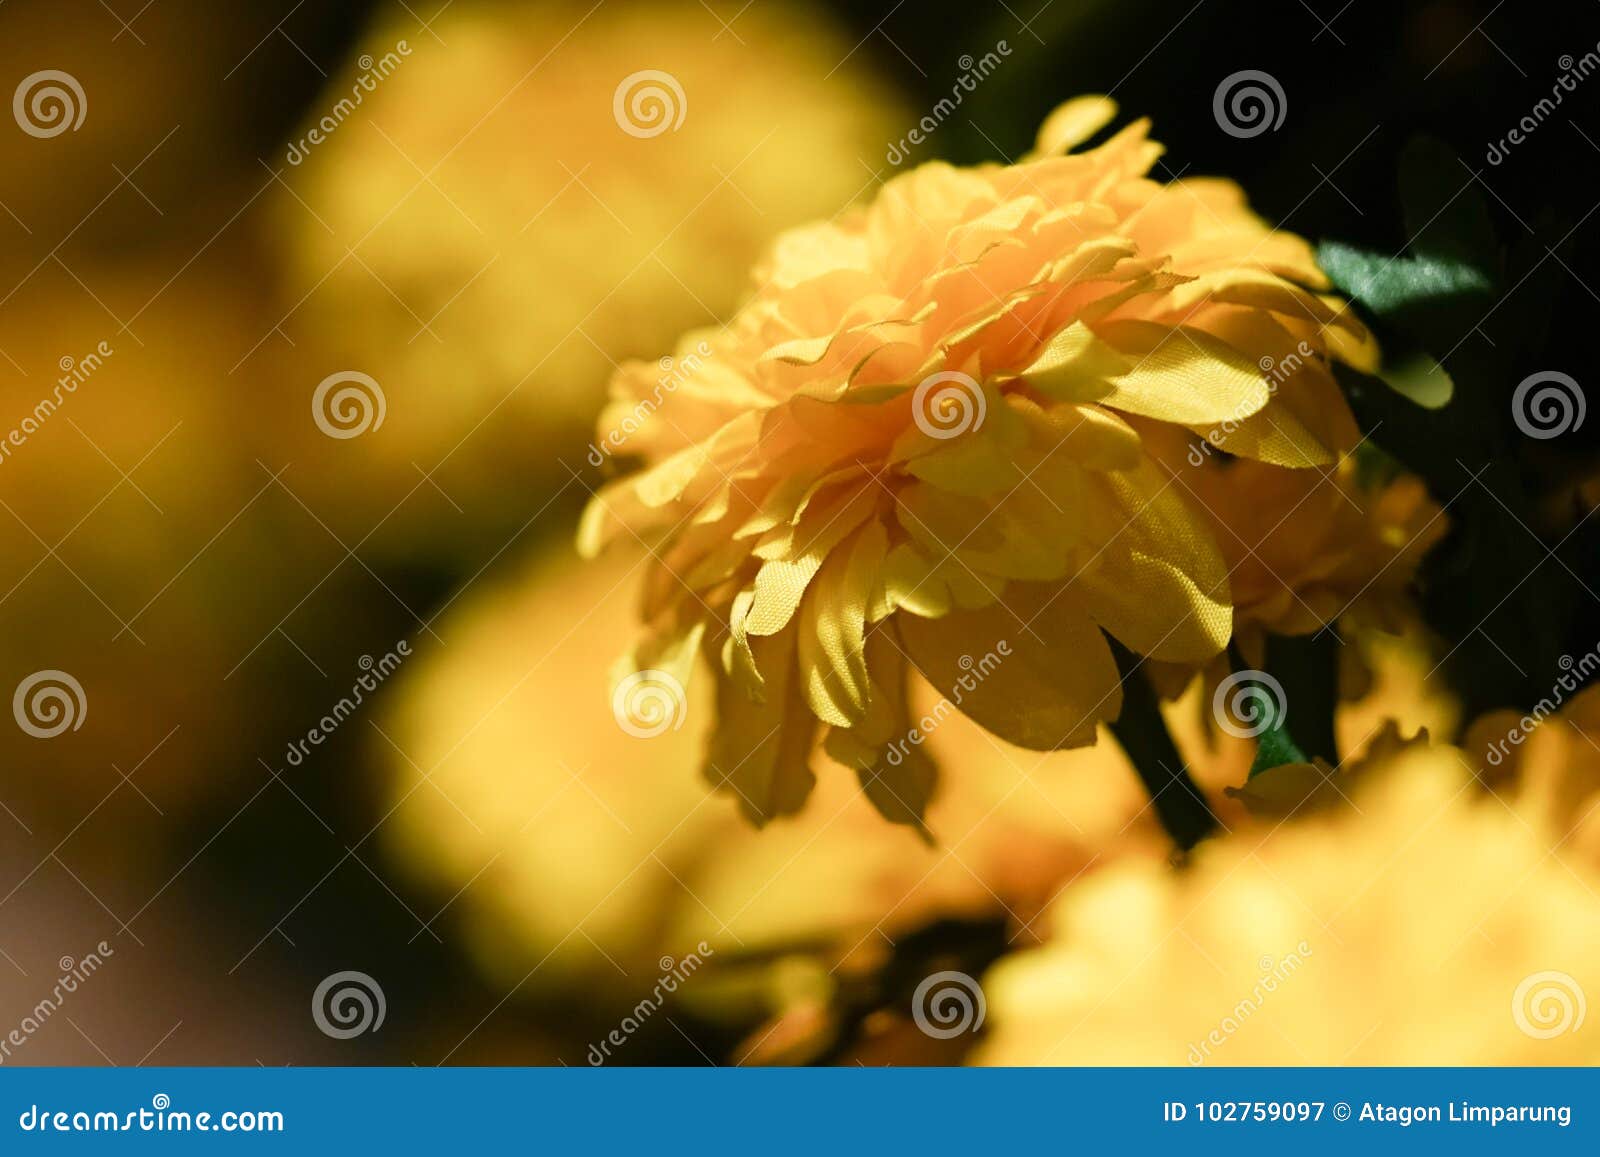 real marigold flowers full bloom the flower look bright beautiful.